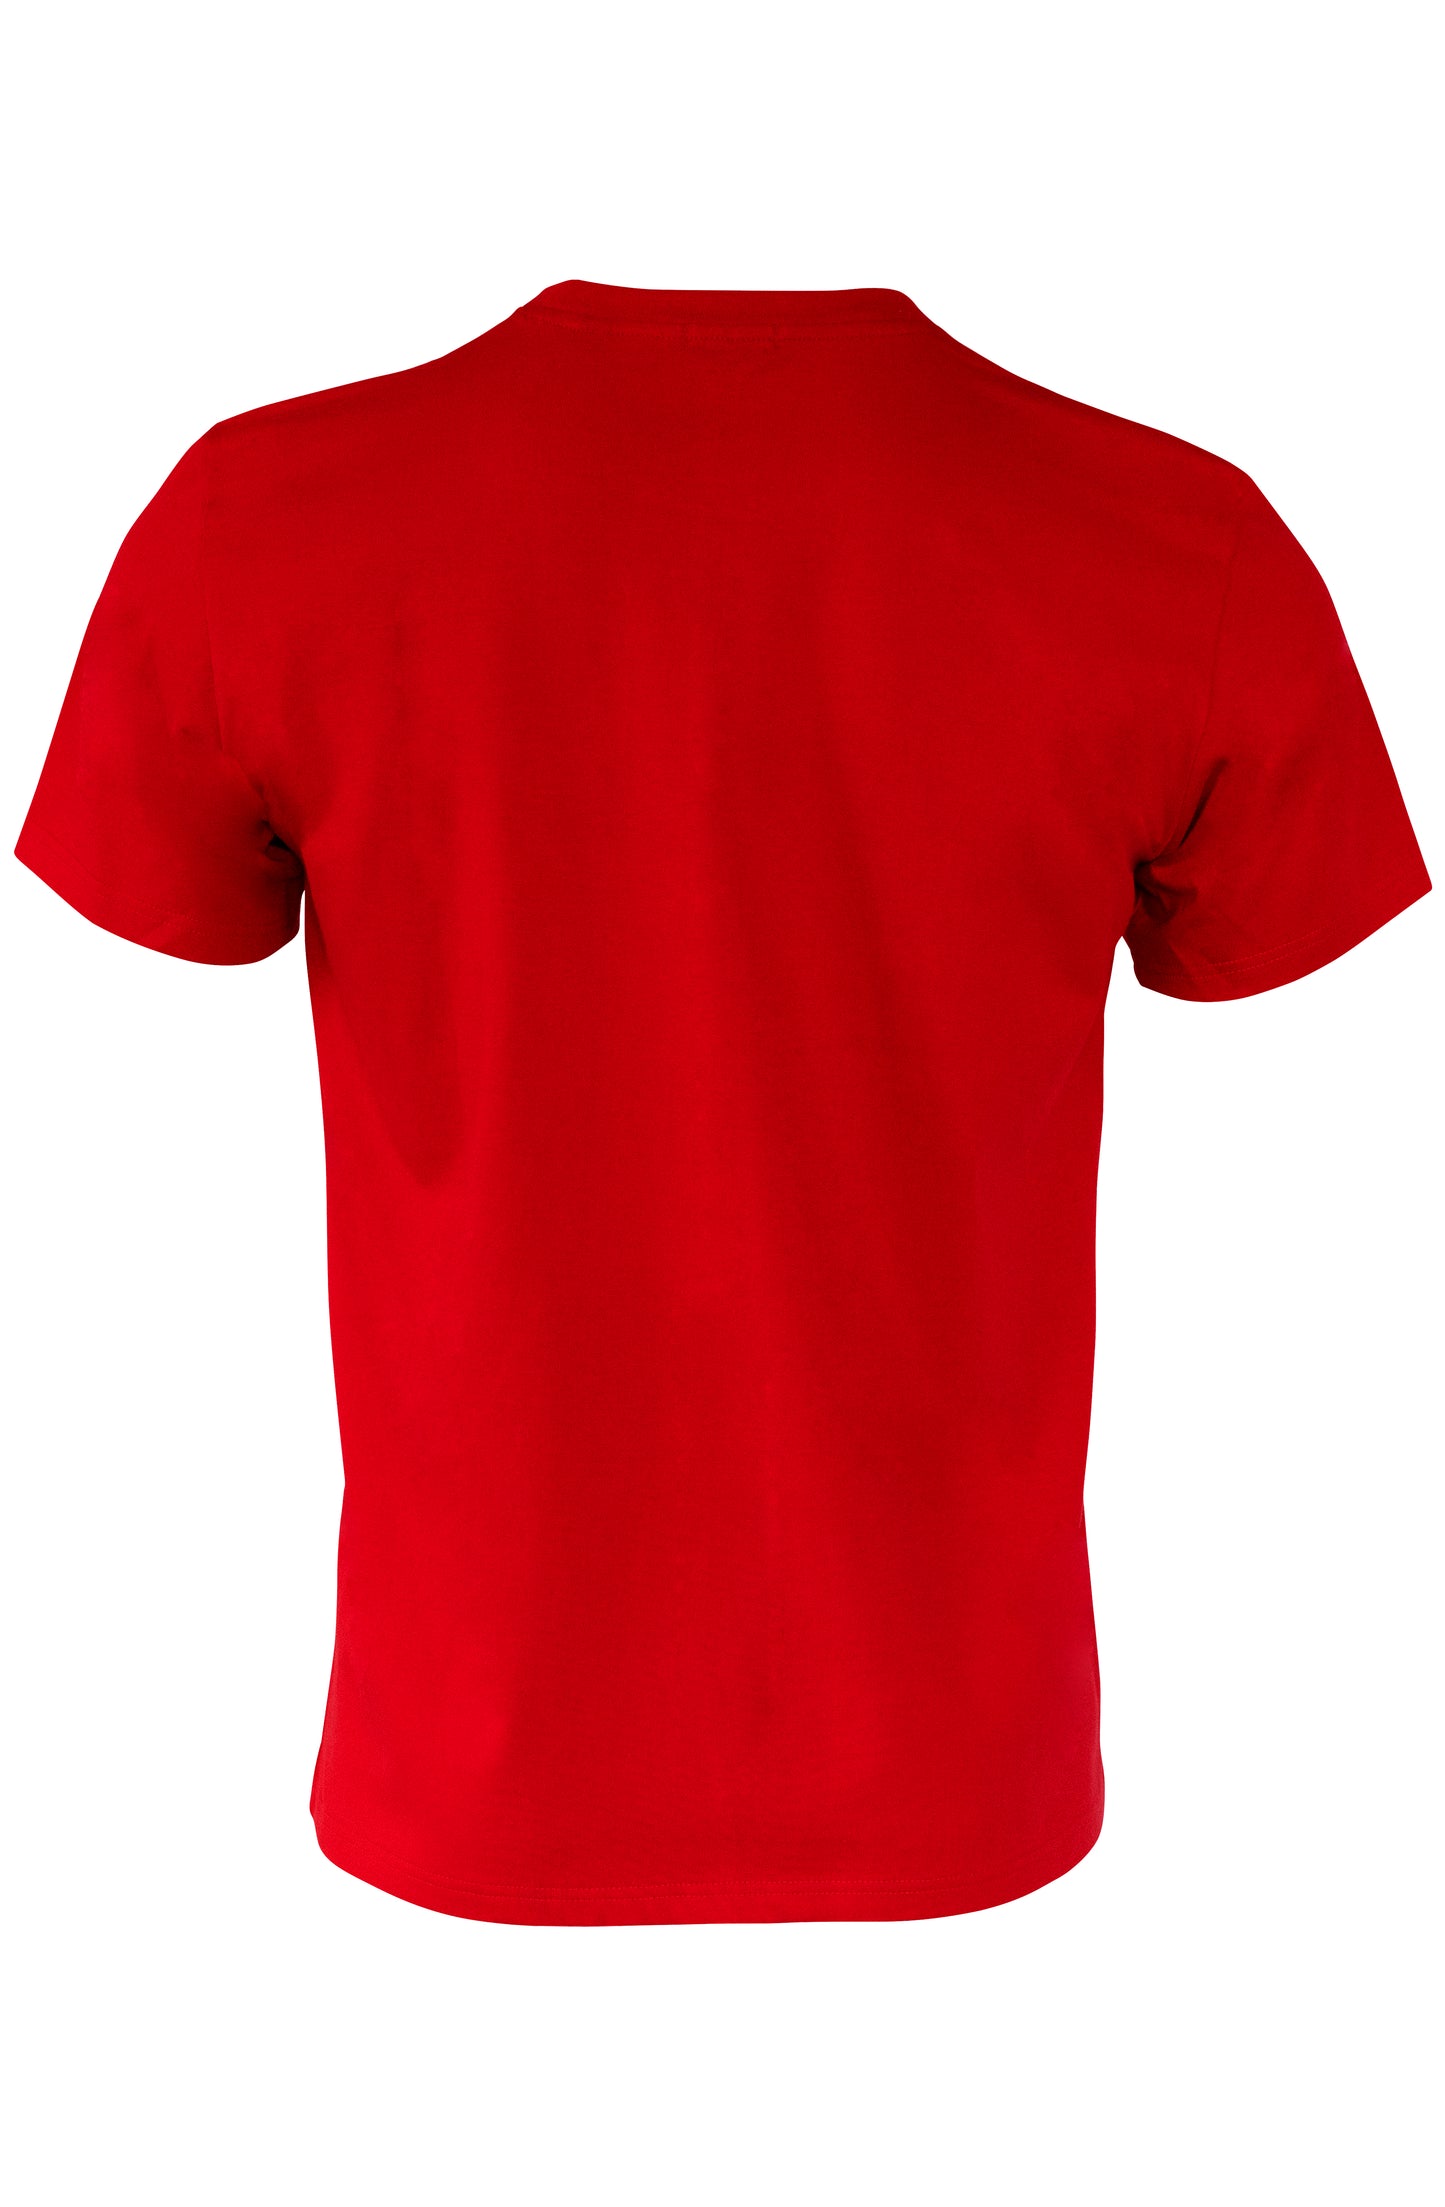 PANTYDROPPER T-SHIRT | RED